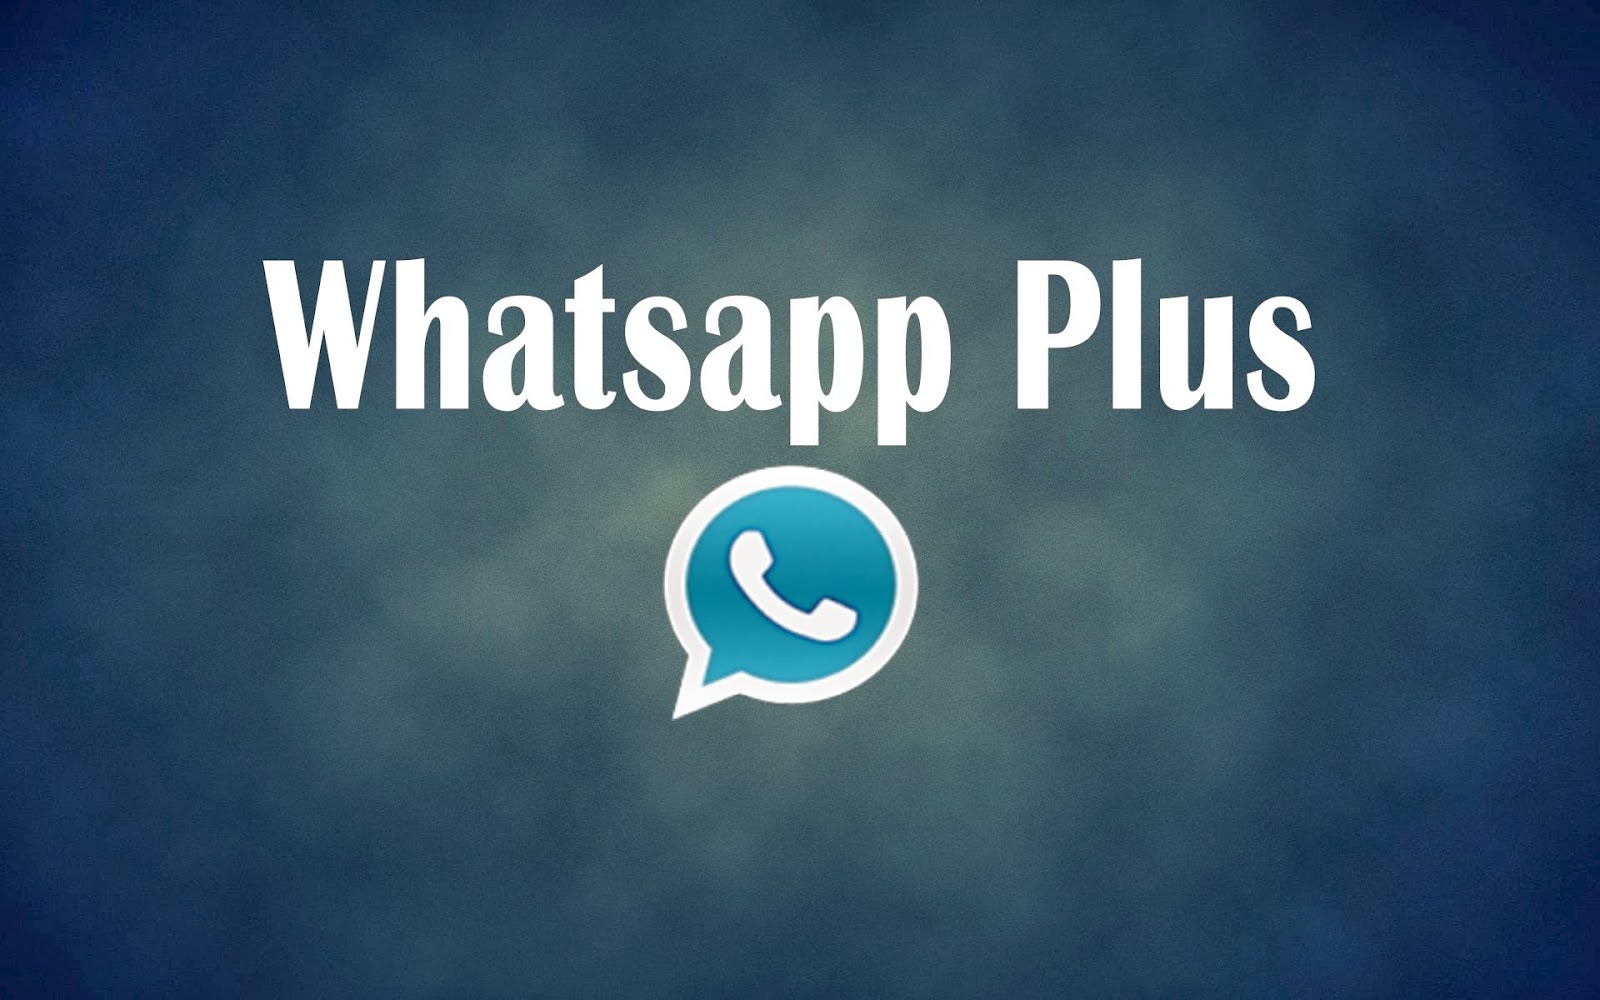 whatsapp apk download for pc